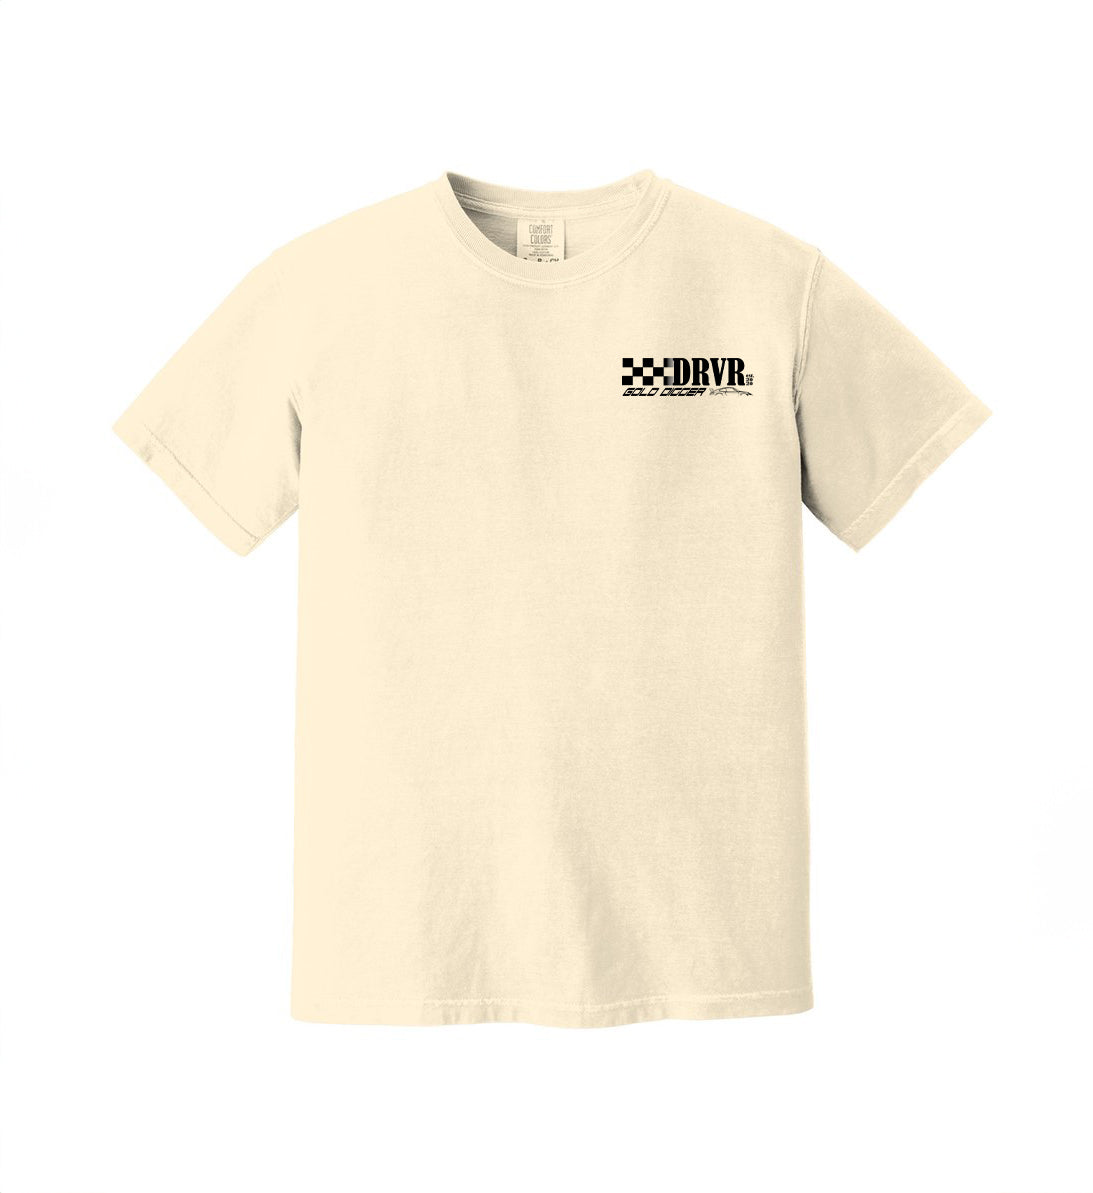 thedrvrco front render for porsche gold digger tee